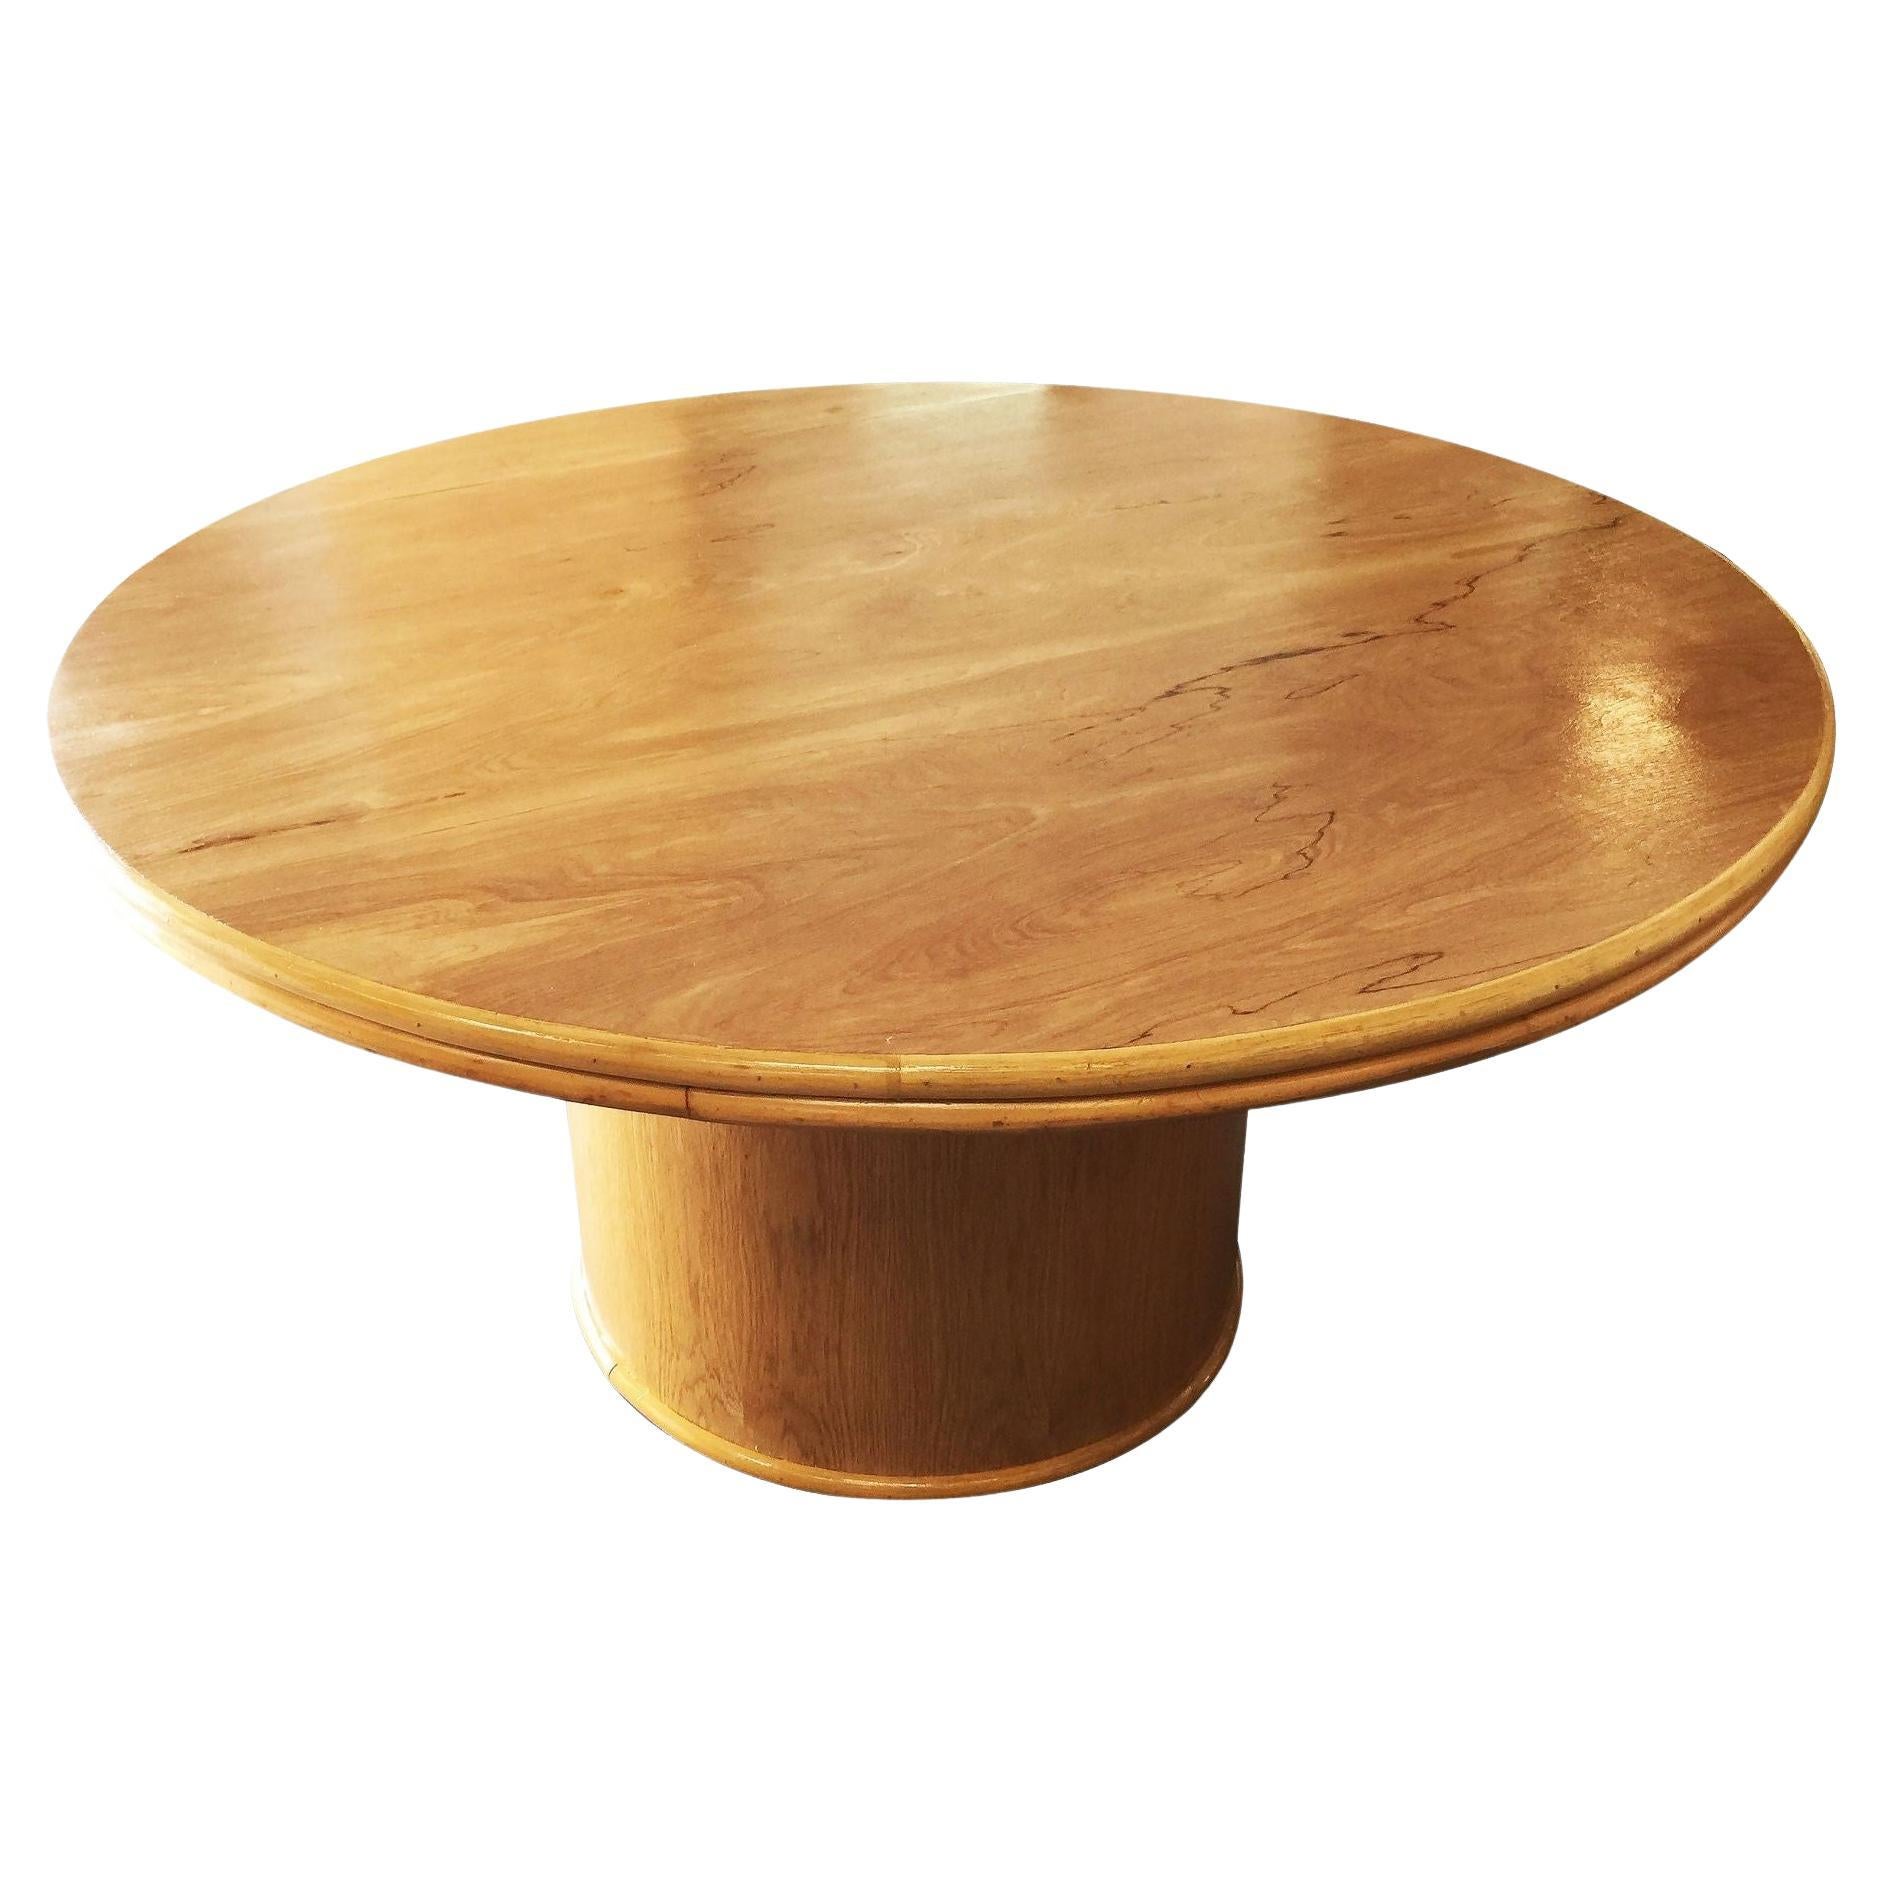 Bentwood Rattan and Oak Round Pedestal Dining Table